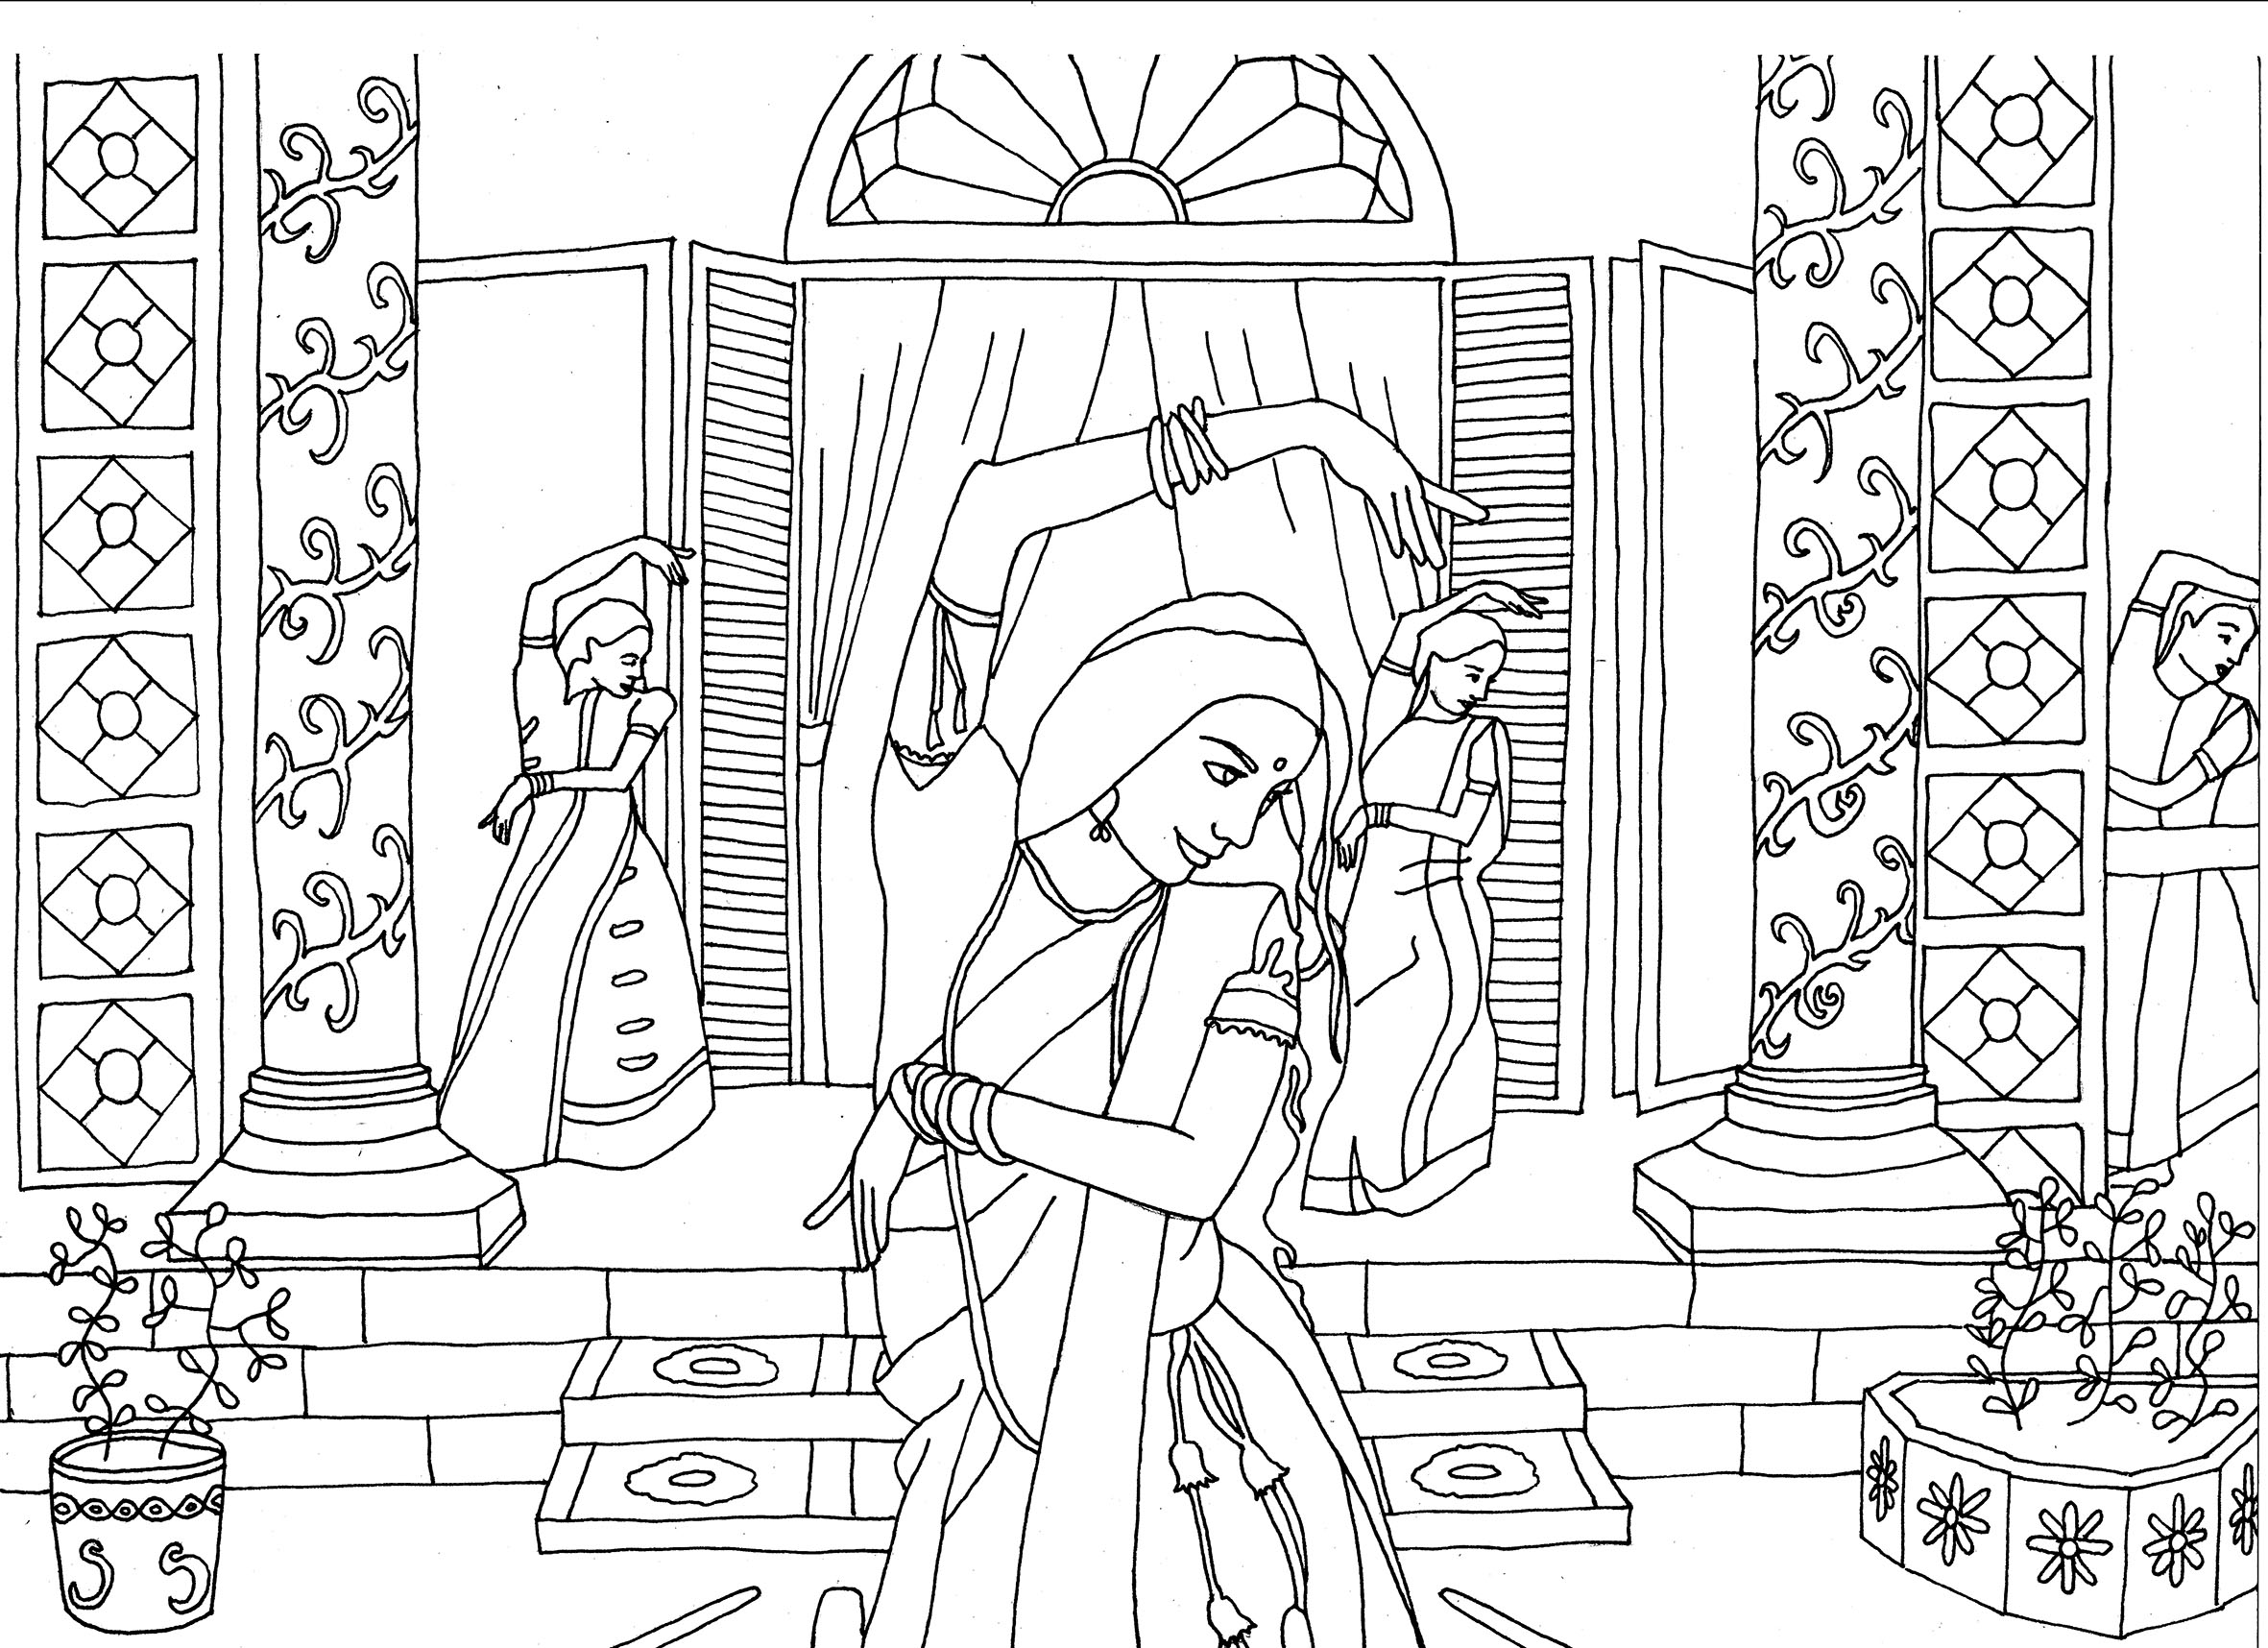 Download Indian dancers - India Adult Coloring Pages